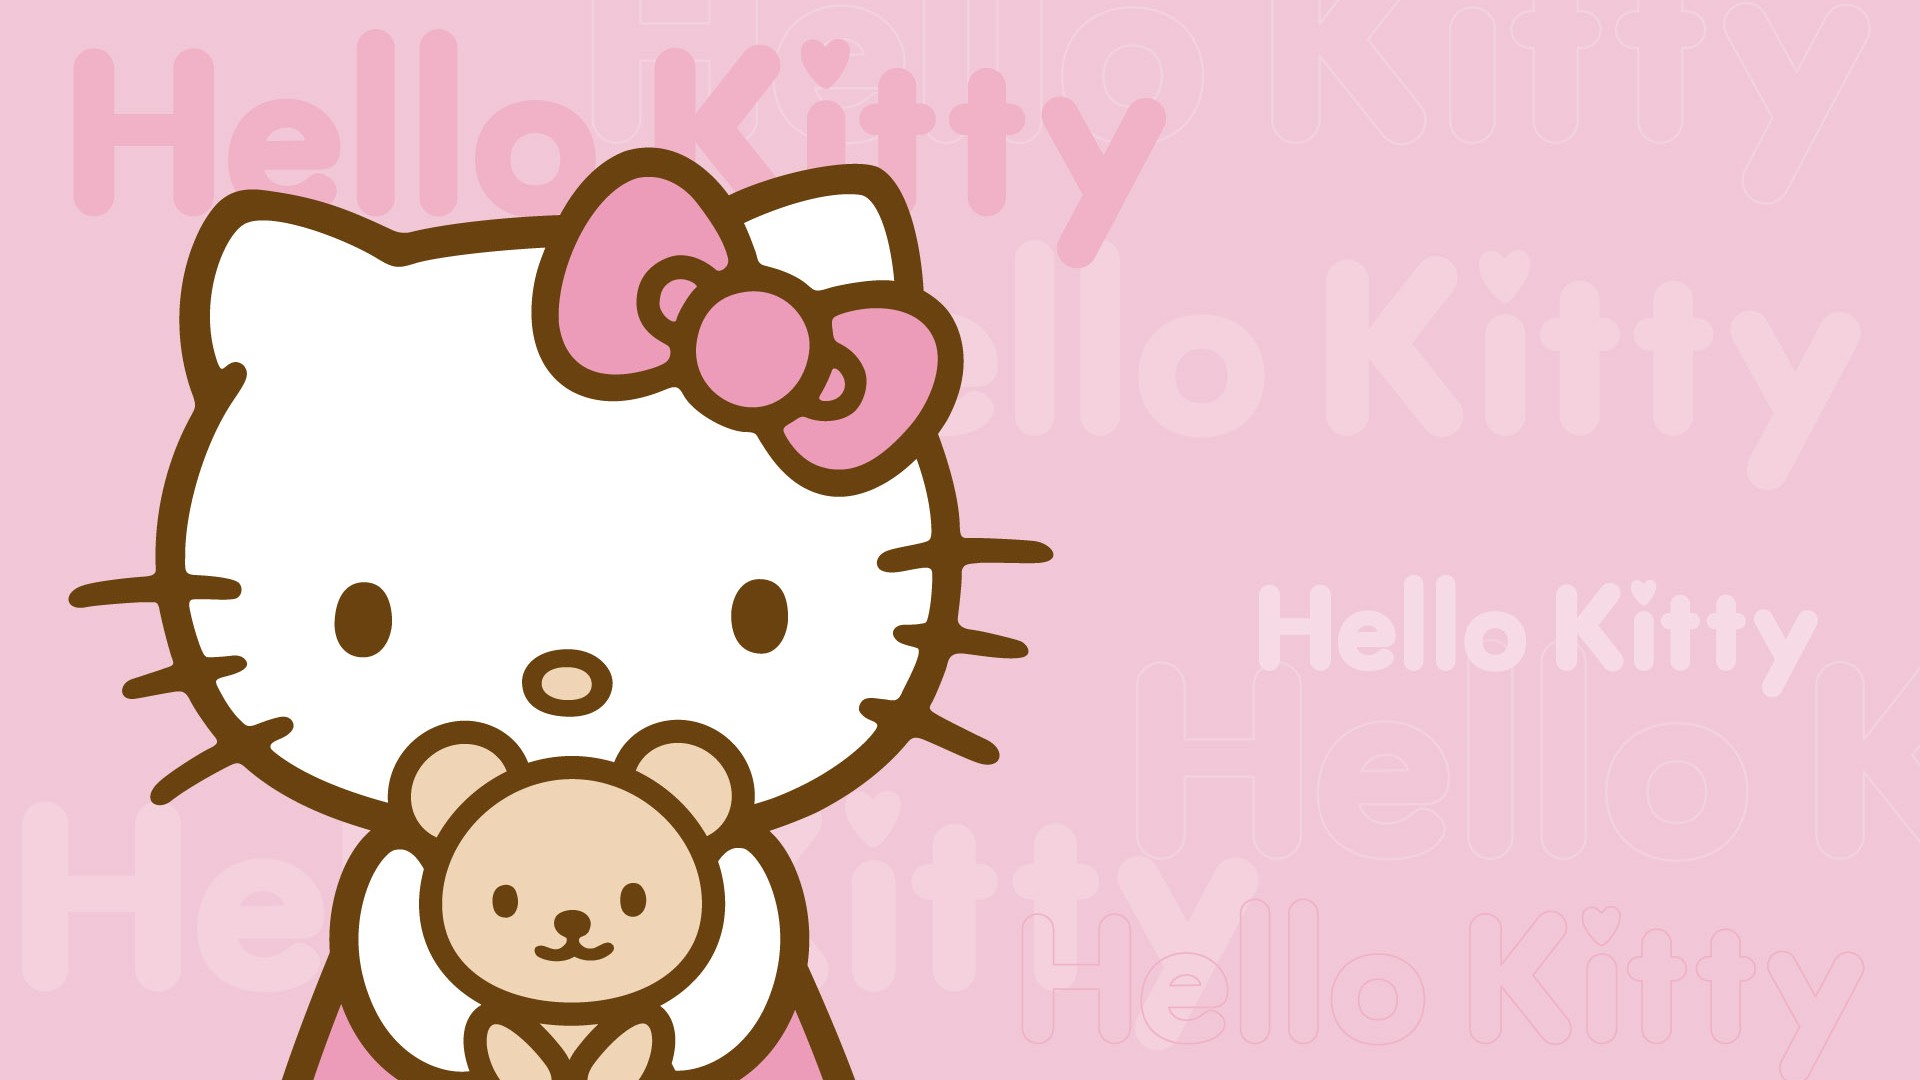 Hello Kitty Pictures Desktop Backgrounds HD with image resolution 1920x1080 pixel. You can use this wallpaper as background for your desktop Computer Screensavers, Android or iPhone smartphones